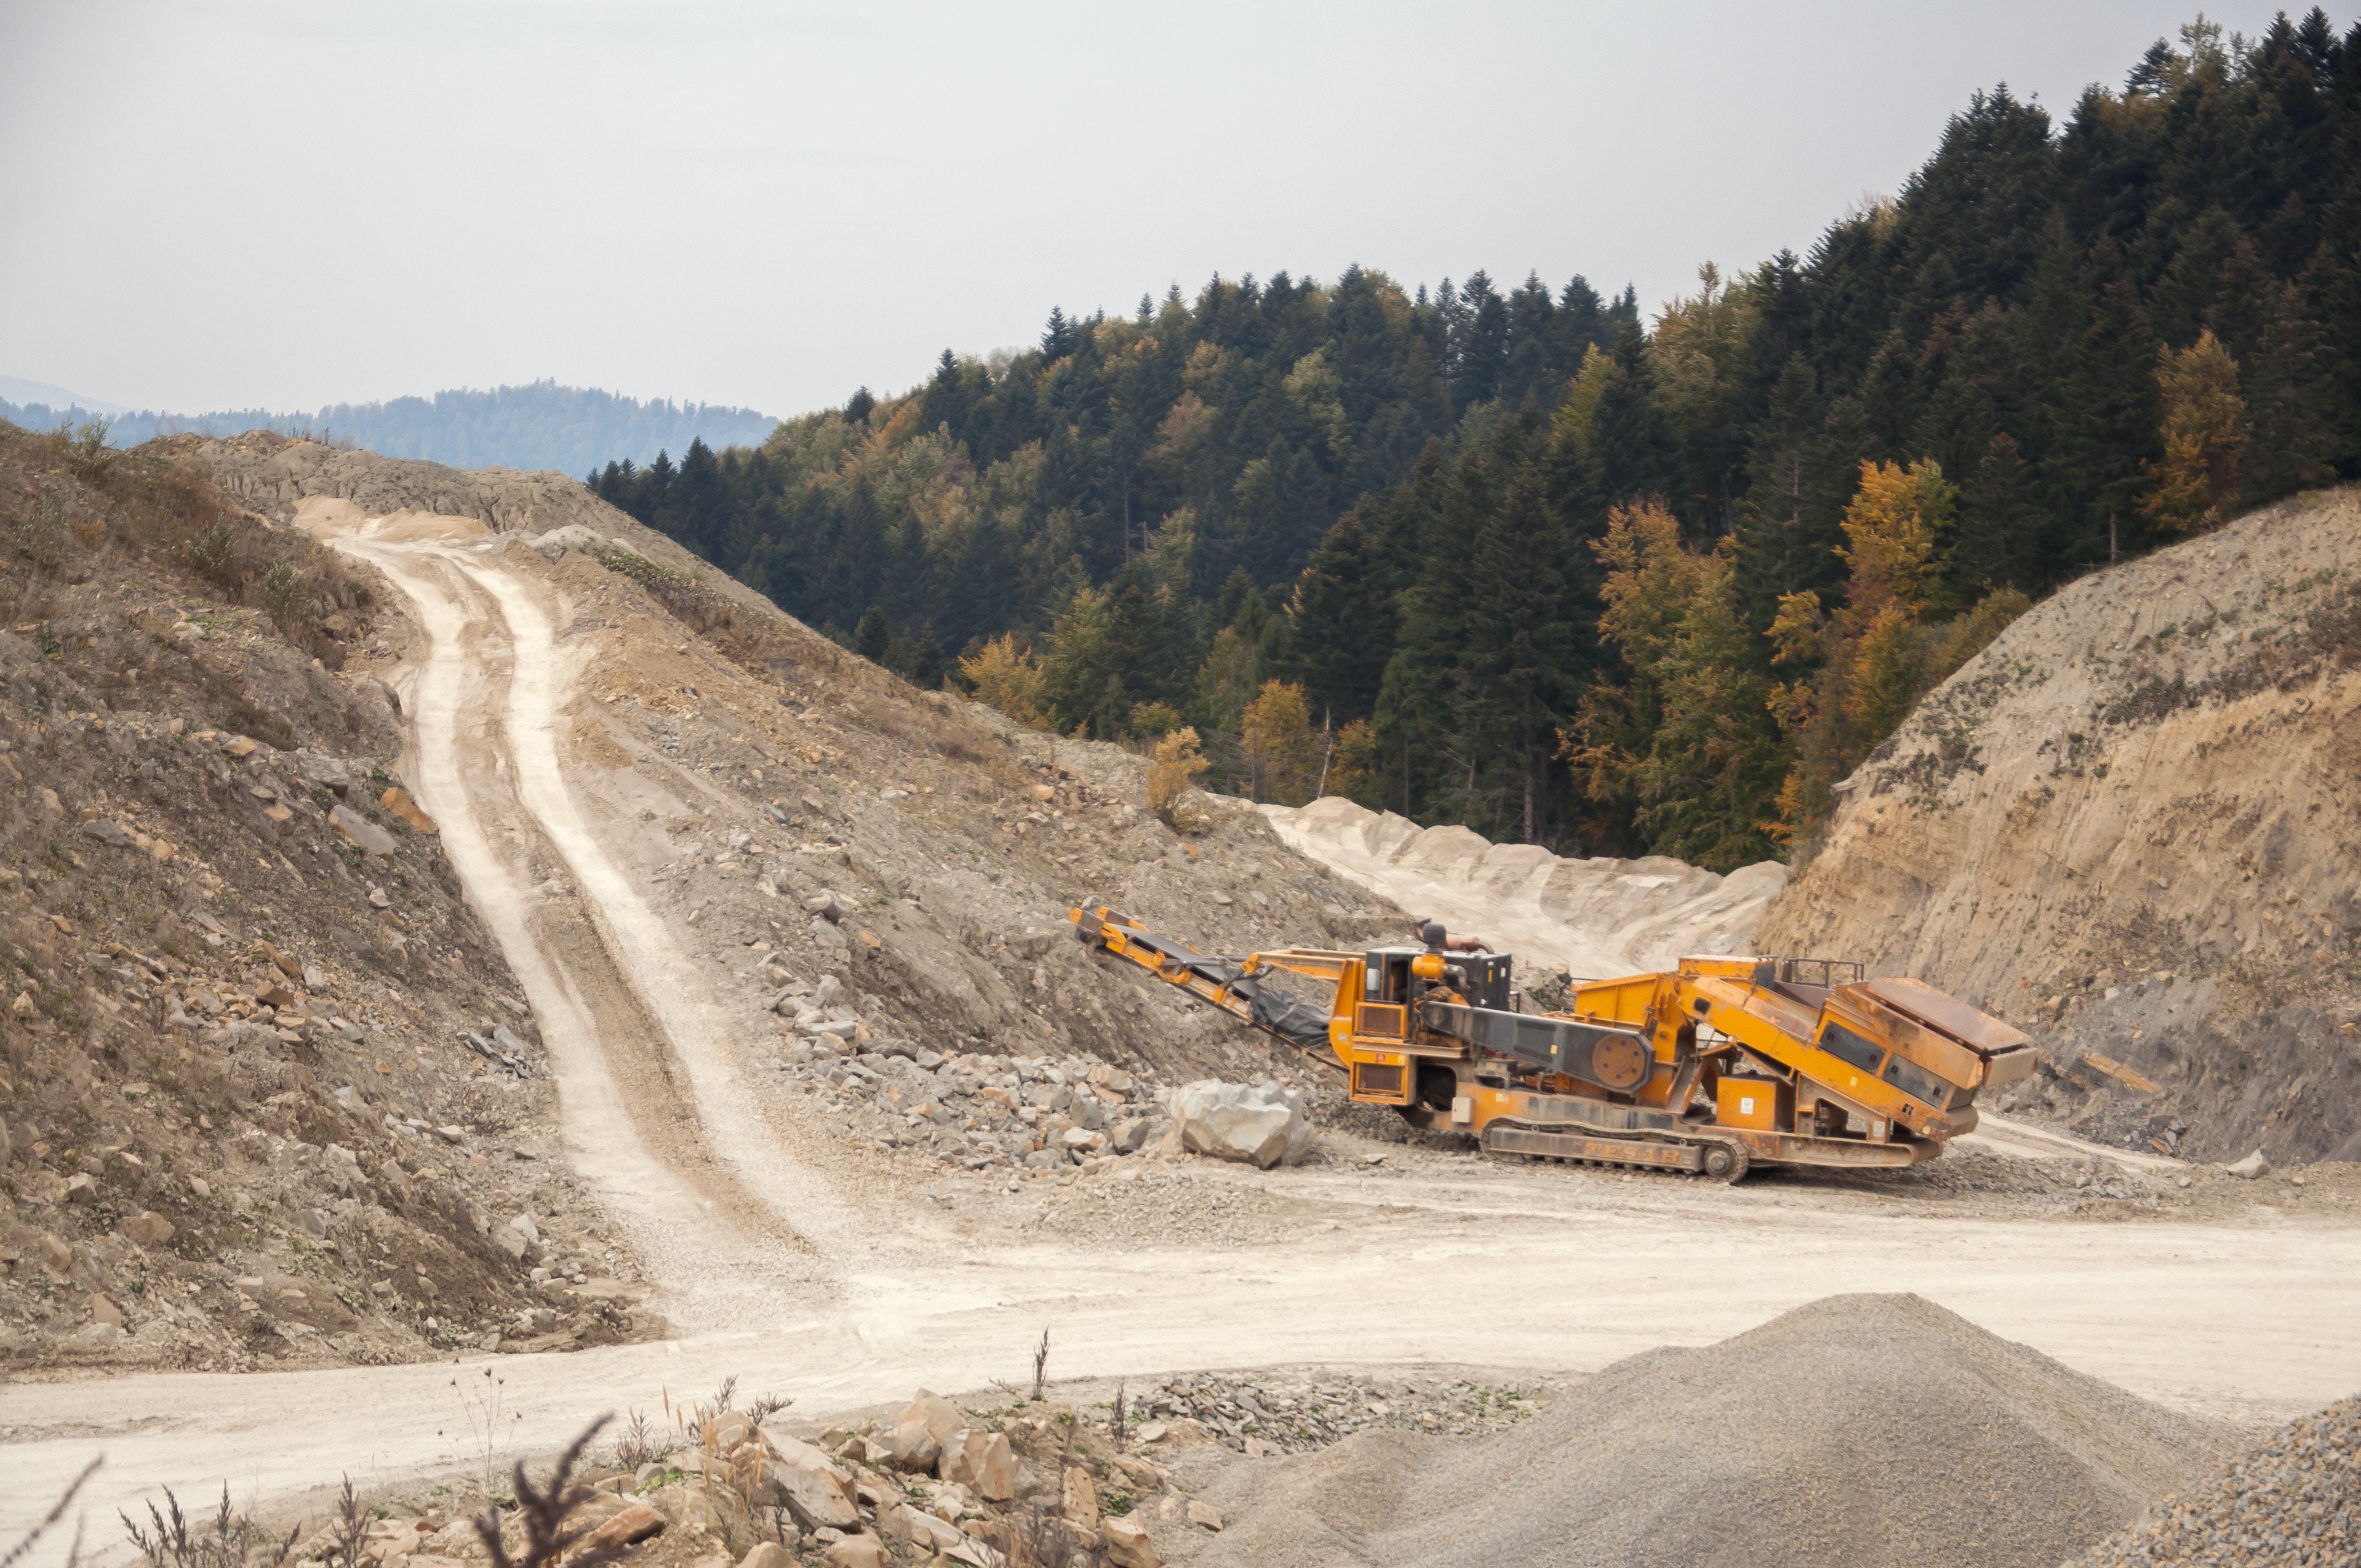 Image of an outdoor mine and JCB